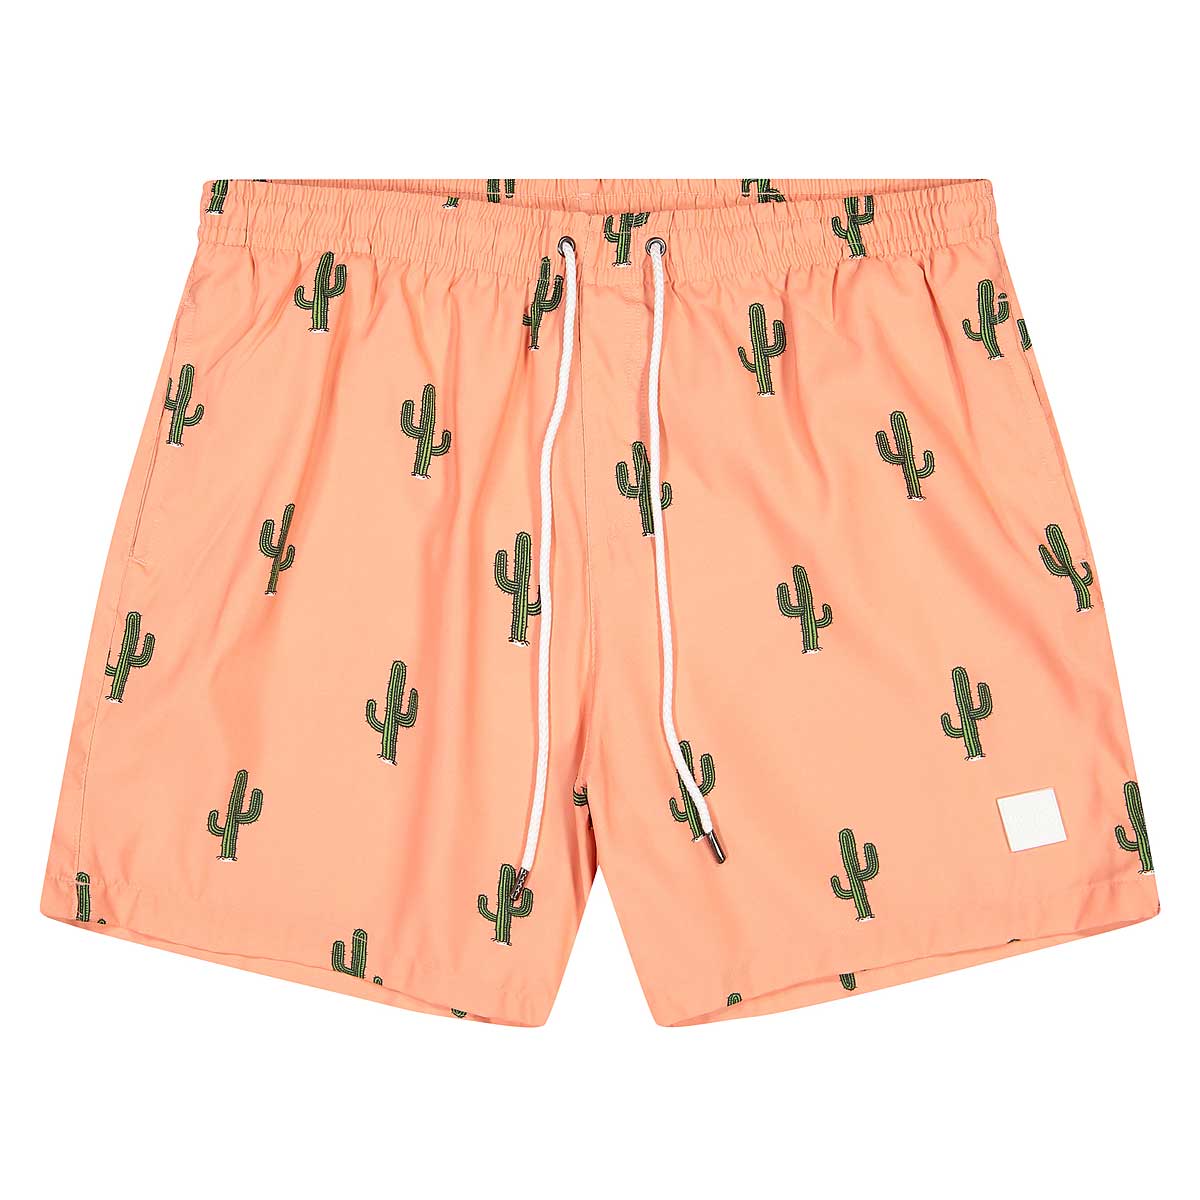 Cute His & Hers MultiSport Shorts Plant Print Swimsuit Cactus Pattern Swim Shorts For Women  Men Perfect Couple Gift Cactus Shorts